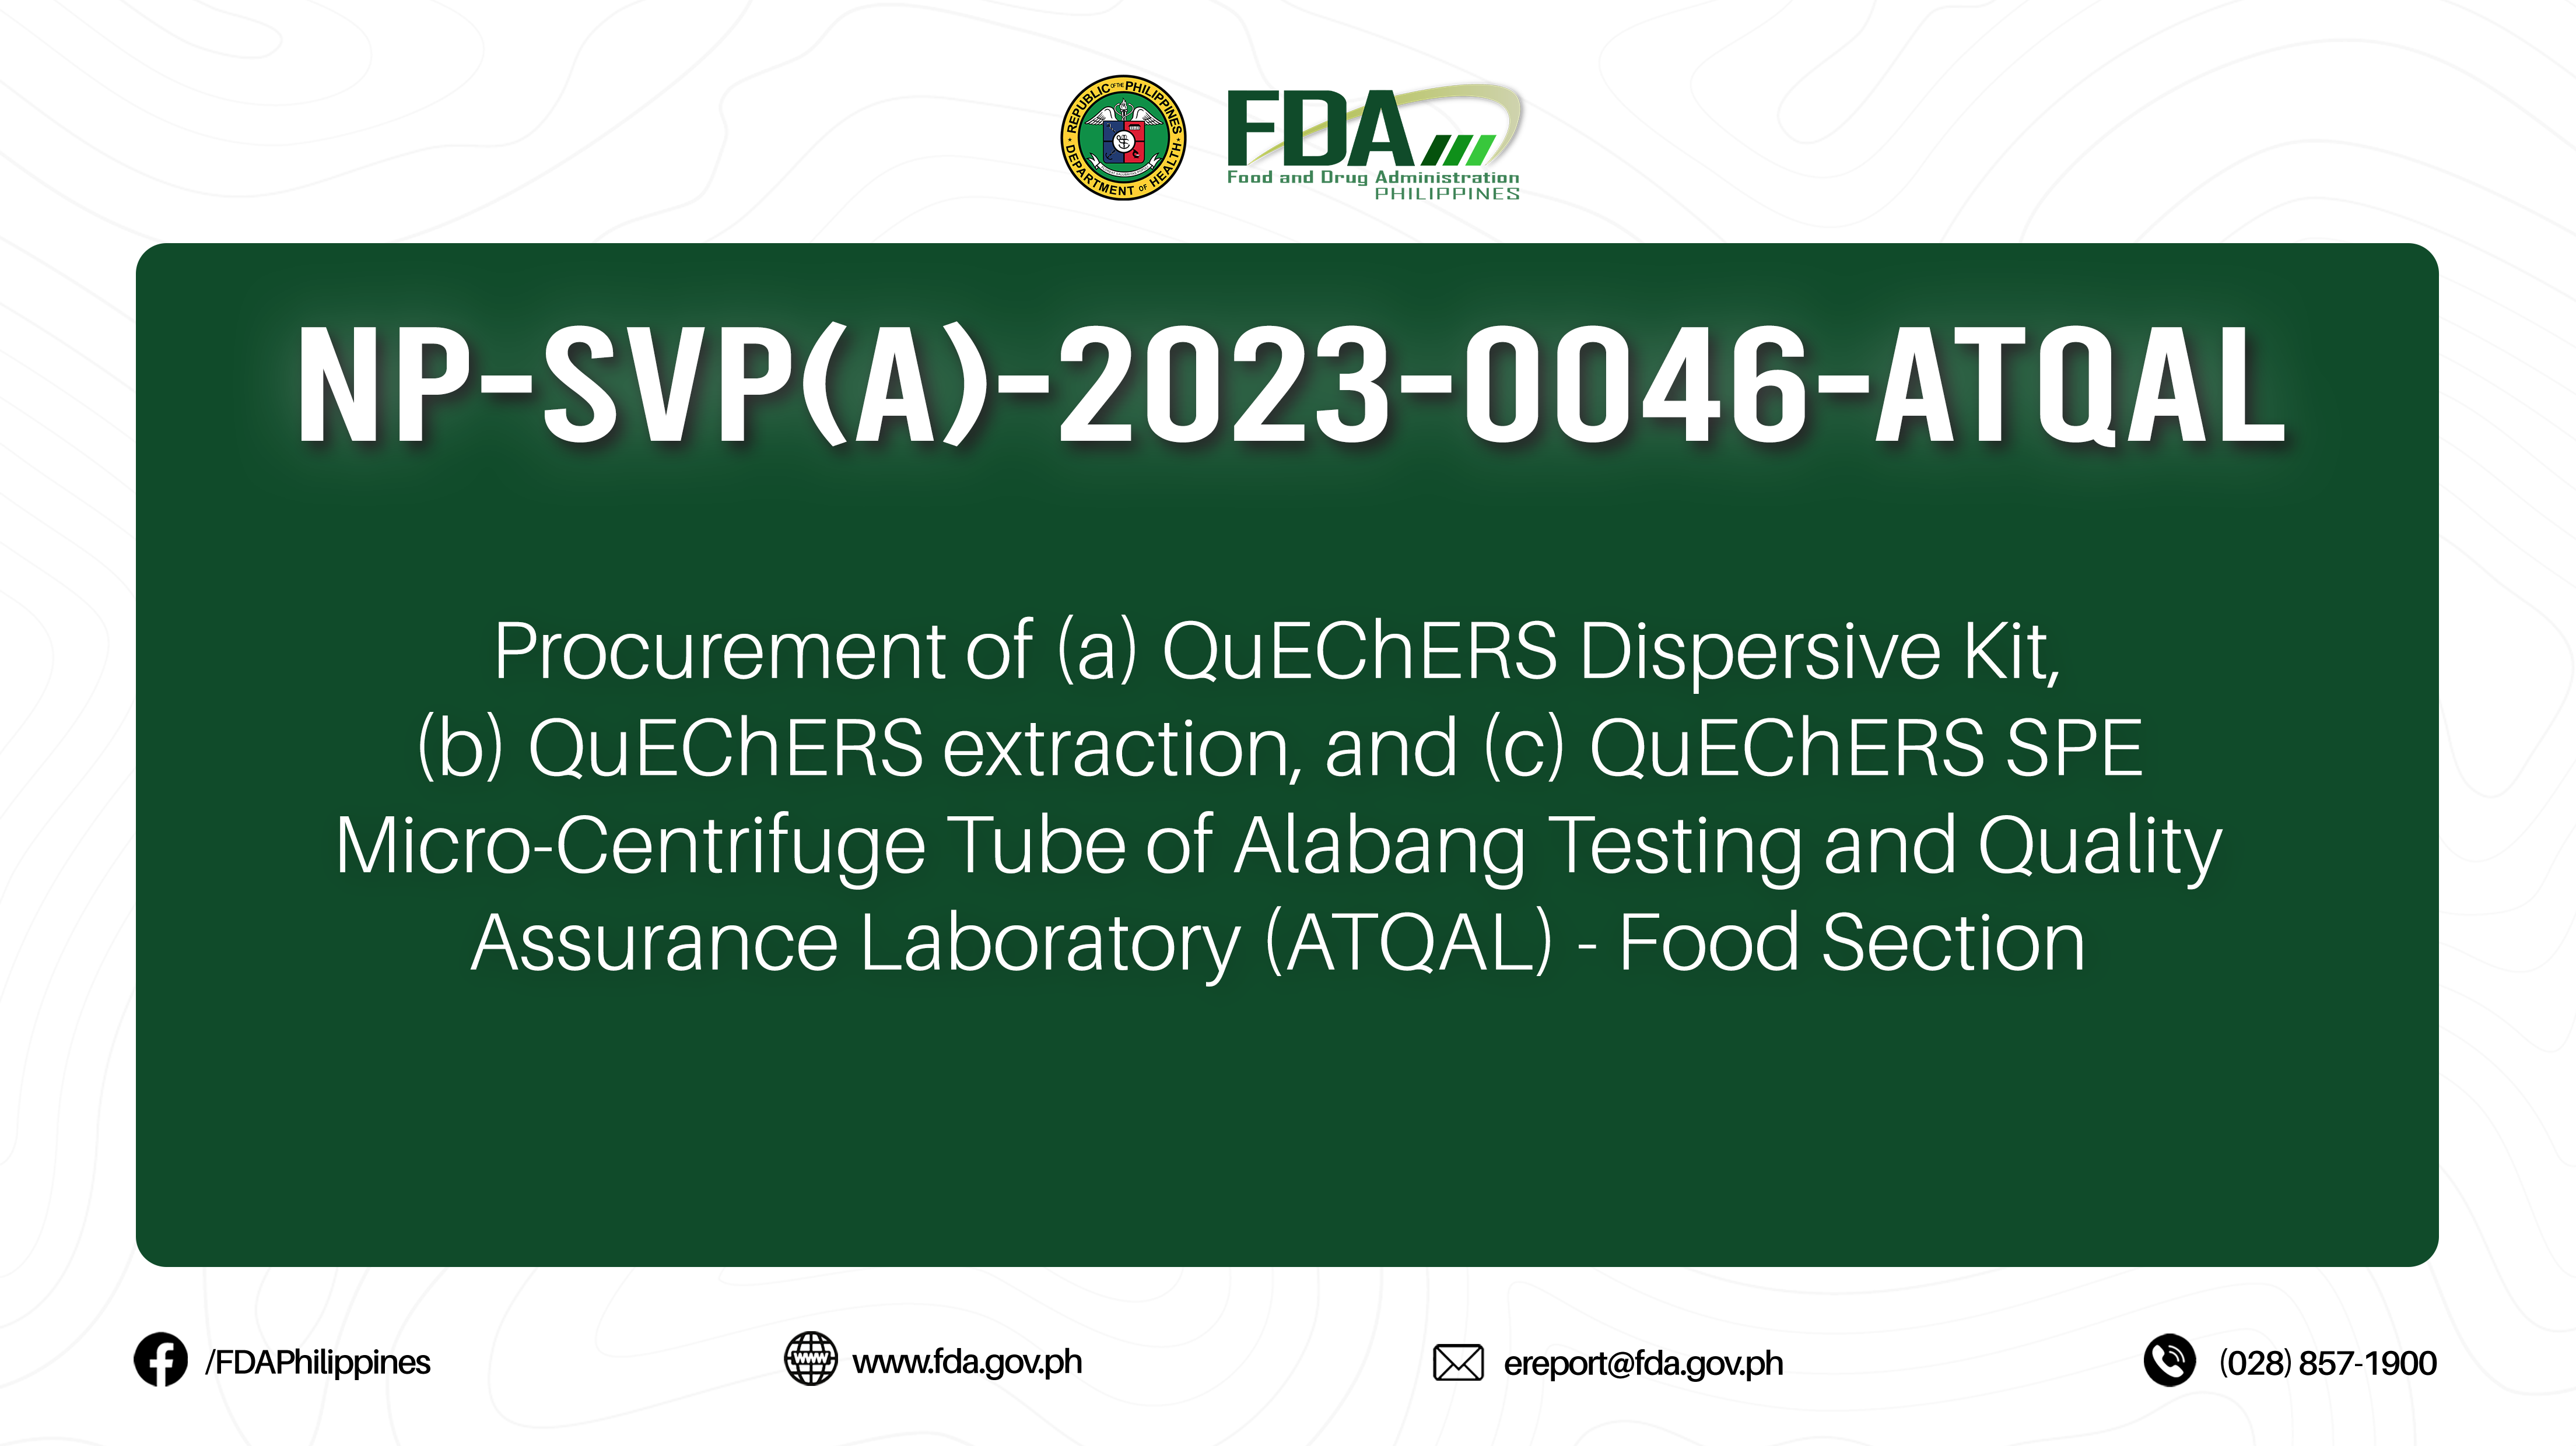 NP-SVP(A)-2023-0046-ATQAL || Procurement of (a) QuEChERS Dispersive Kit, (b) QuEChERS extraction, and (c) QuEChERS SPE Micro-Centrifuge Tube of Alabang Testing and Quality Assurance Laboratory (ATQAL) – Food Section